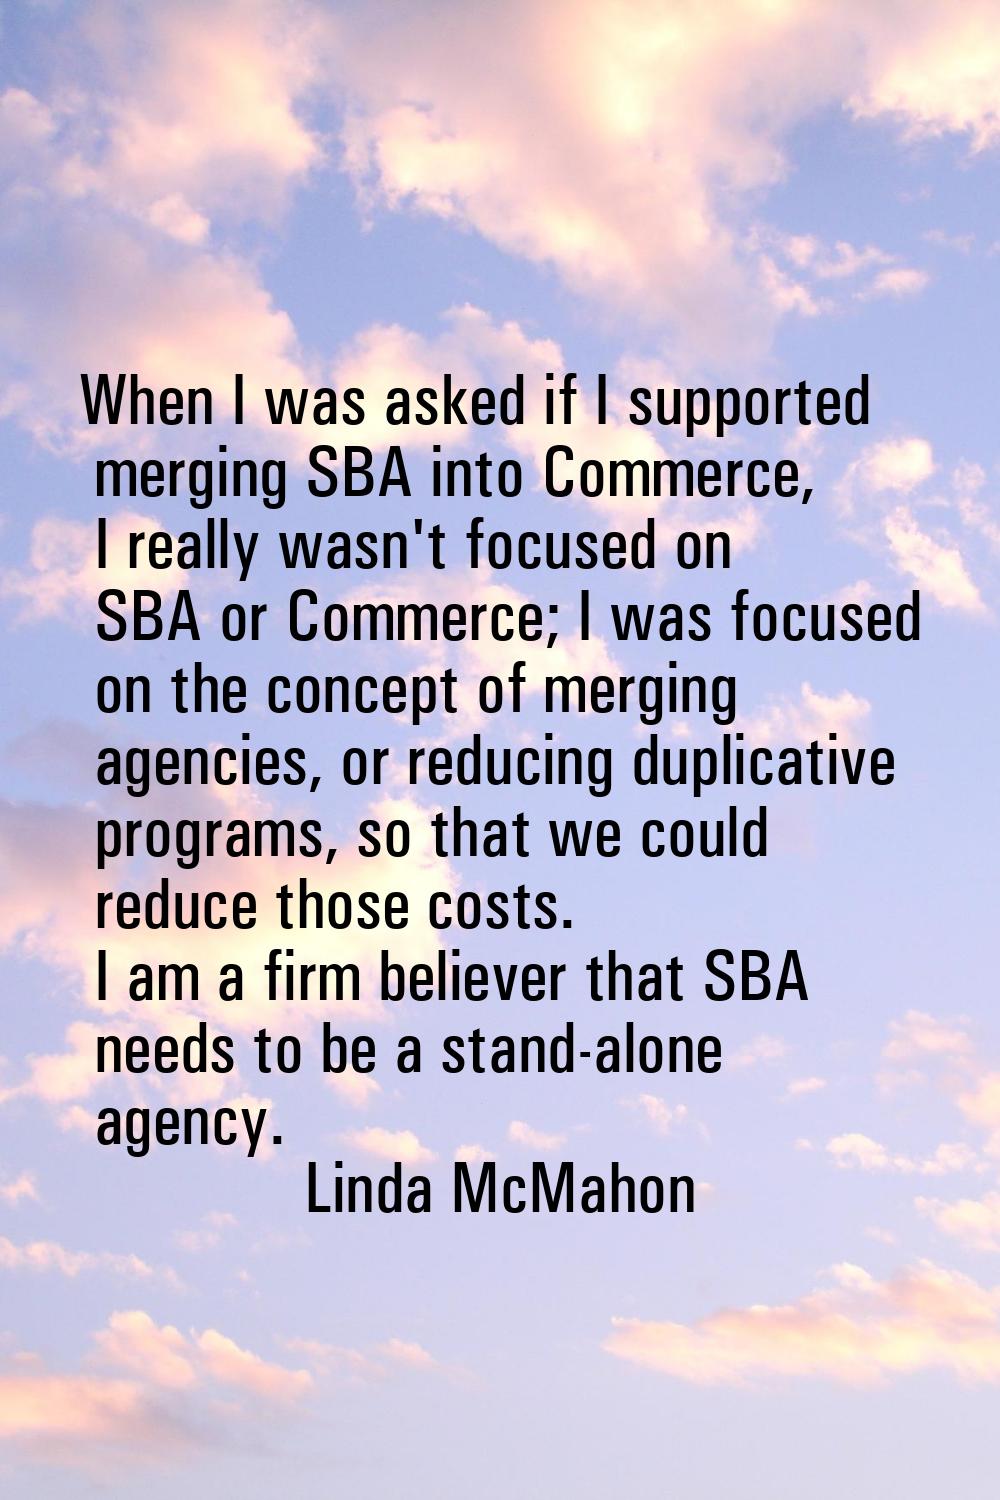 When I was asked if I supported merging SBA into Commerce, I really wasn't focused on SBA or Commer